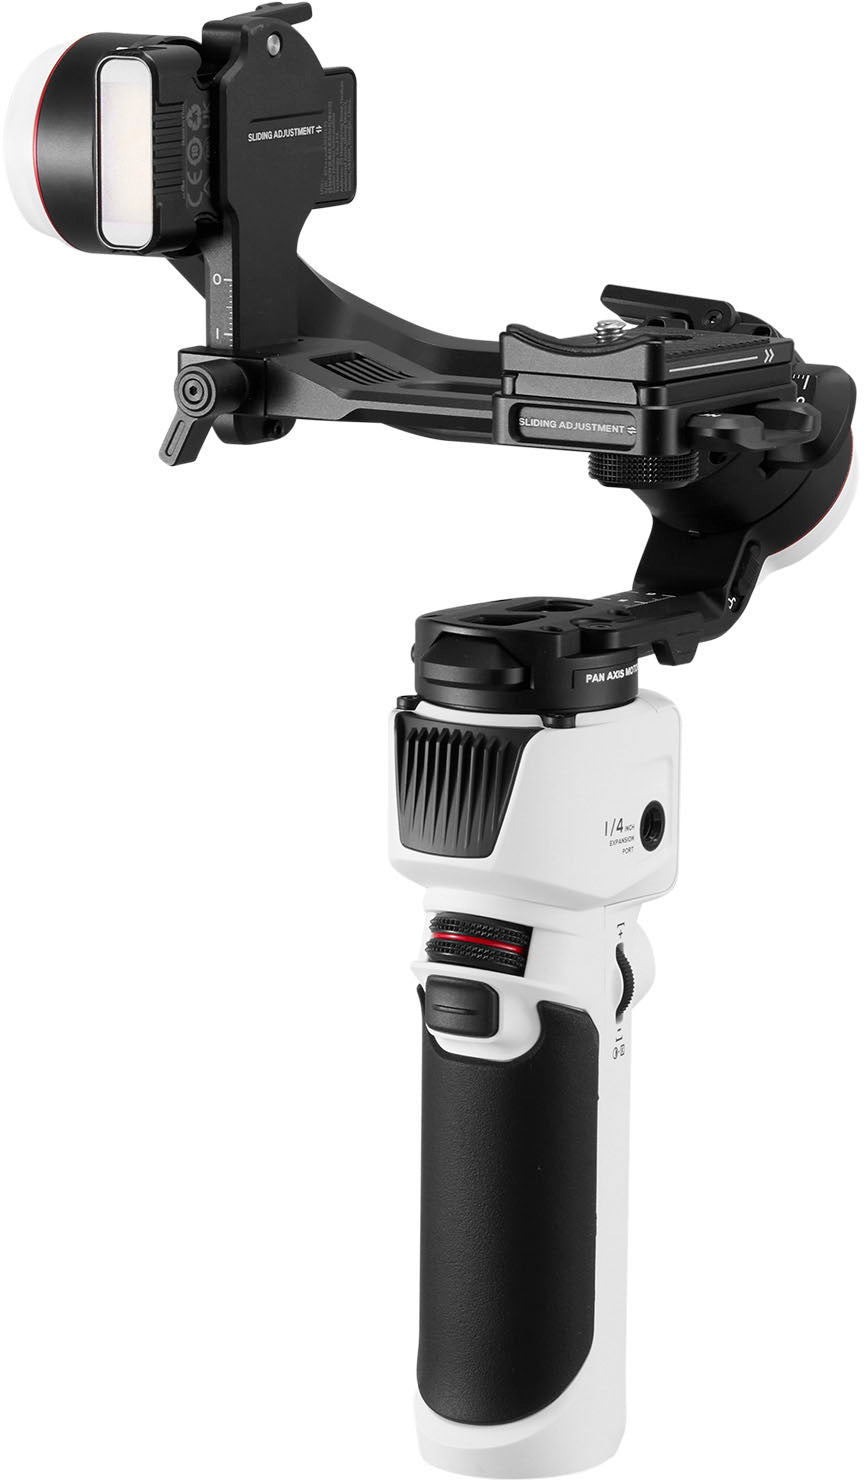 Zhiyun - Crane-M 3S 3-Axis Gimbal Stabilizer Standard for Smartphones, Action or Mirrorless Cameras w/ detachable tri-pod stand - White_0